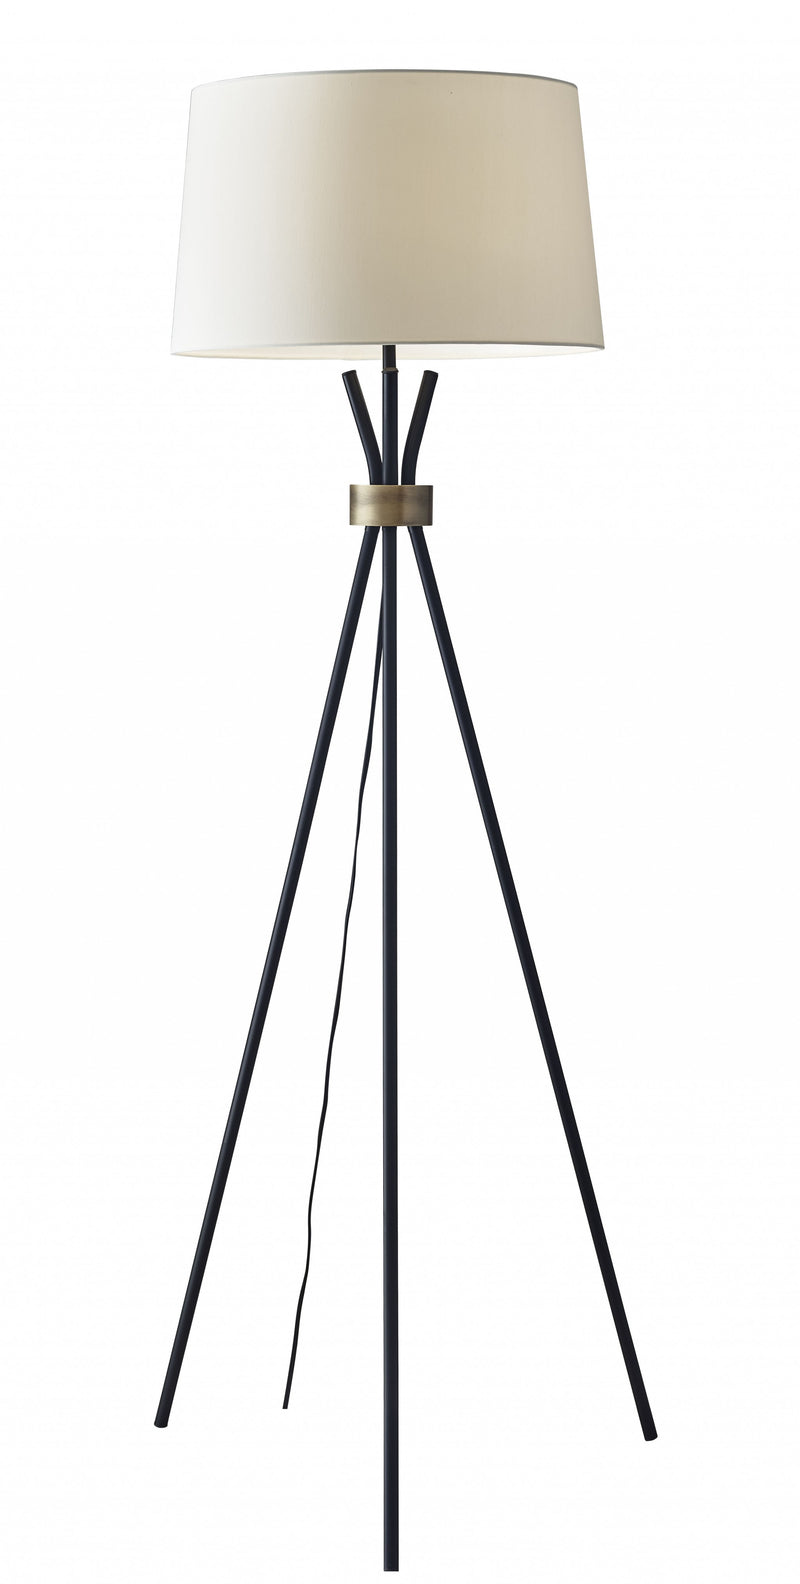 Home Outfitters 60" Black Tripod Floor Lamp With White Empire Shade